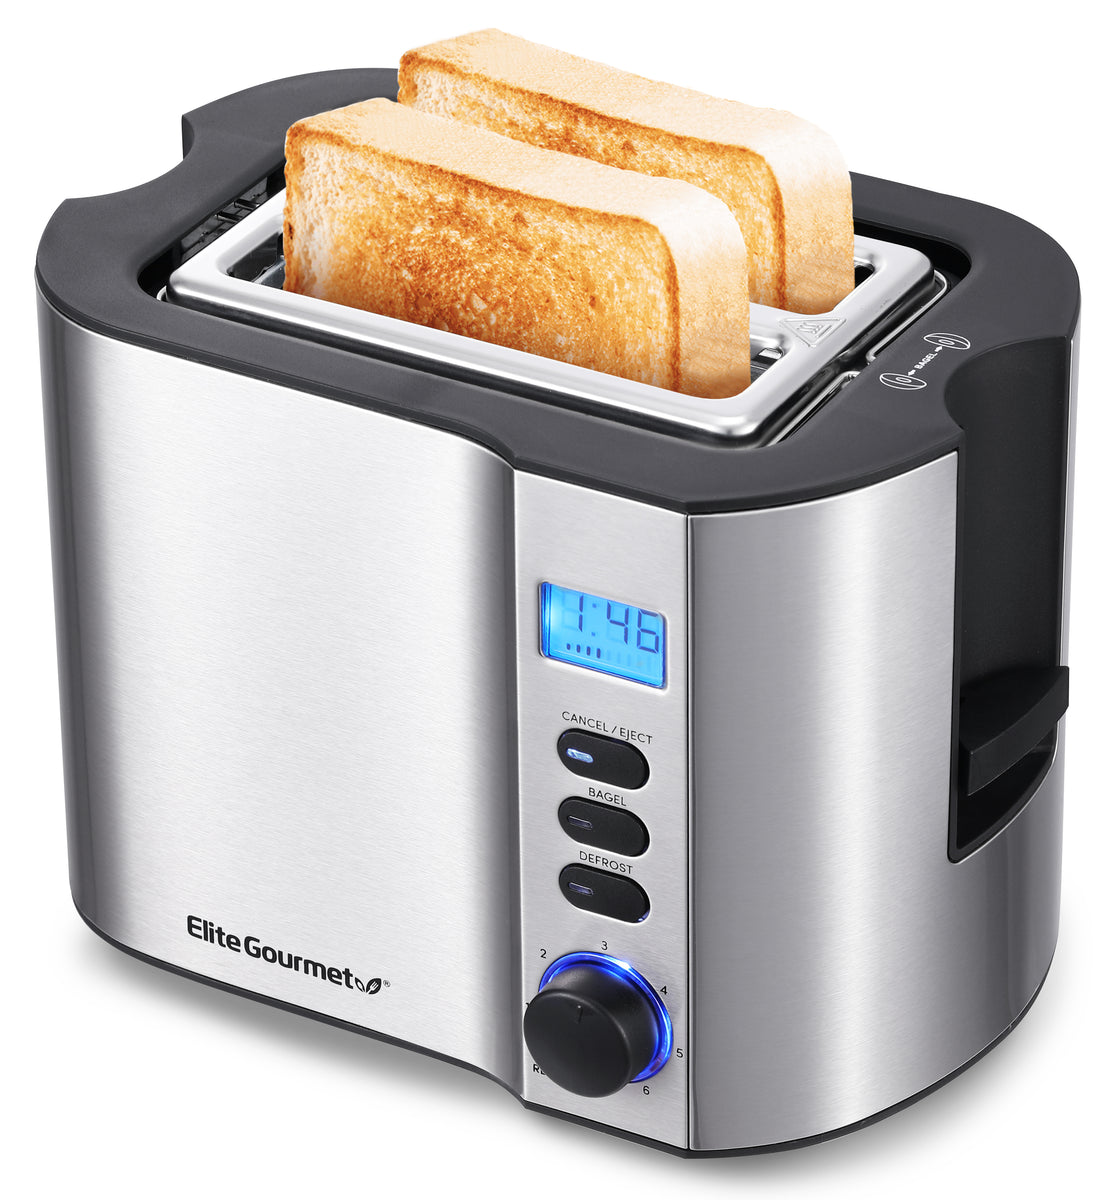 Mueller UltraToast Full Stainless Steel Toaster 4 Slice, Long Extra-Wide Slots with Removable Tray, Cancel/Defrost/Reheat Functions, 6 Browning